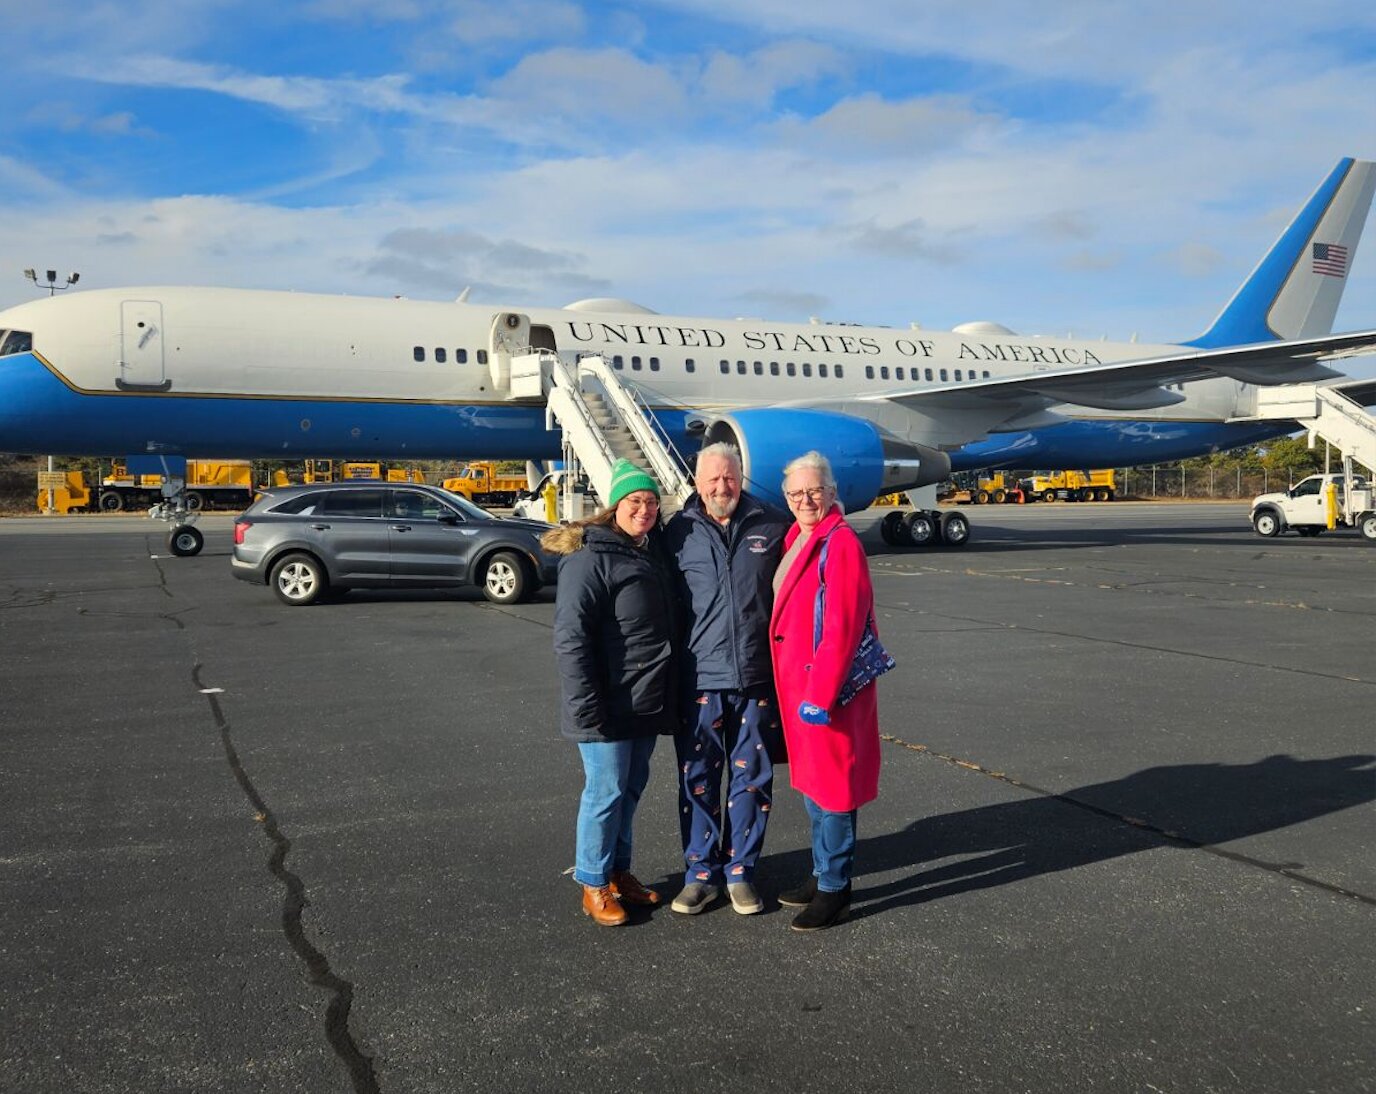 Faregrounds Restaurant owners Bill and Kim Puder and their niece Sharon in front of Air Force One Sunday.